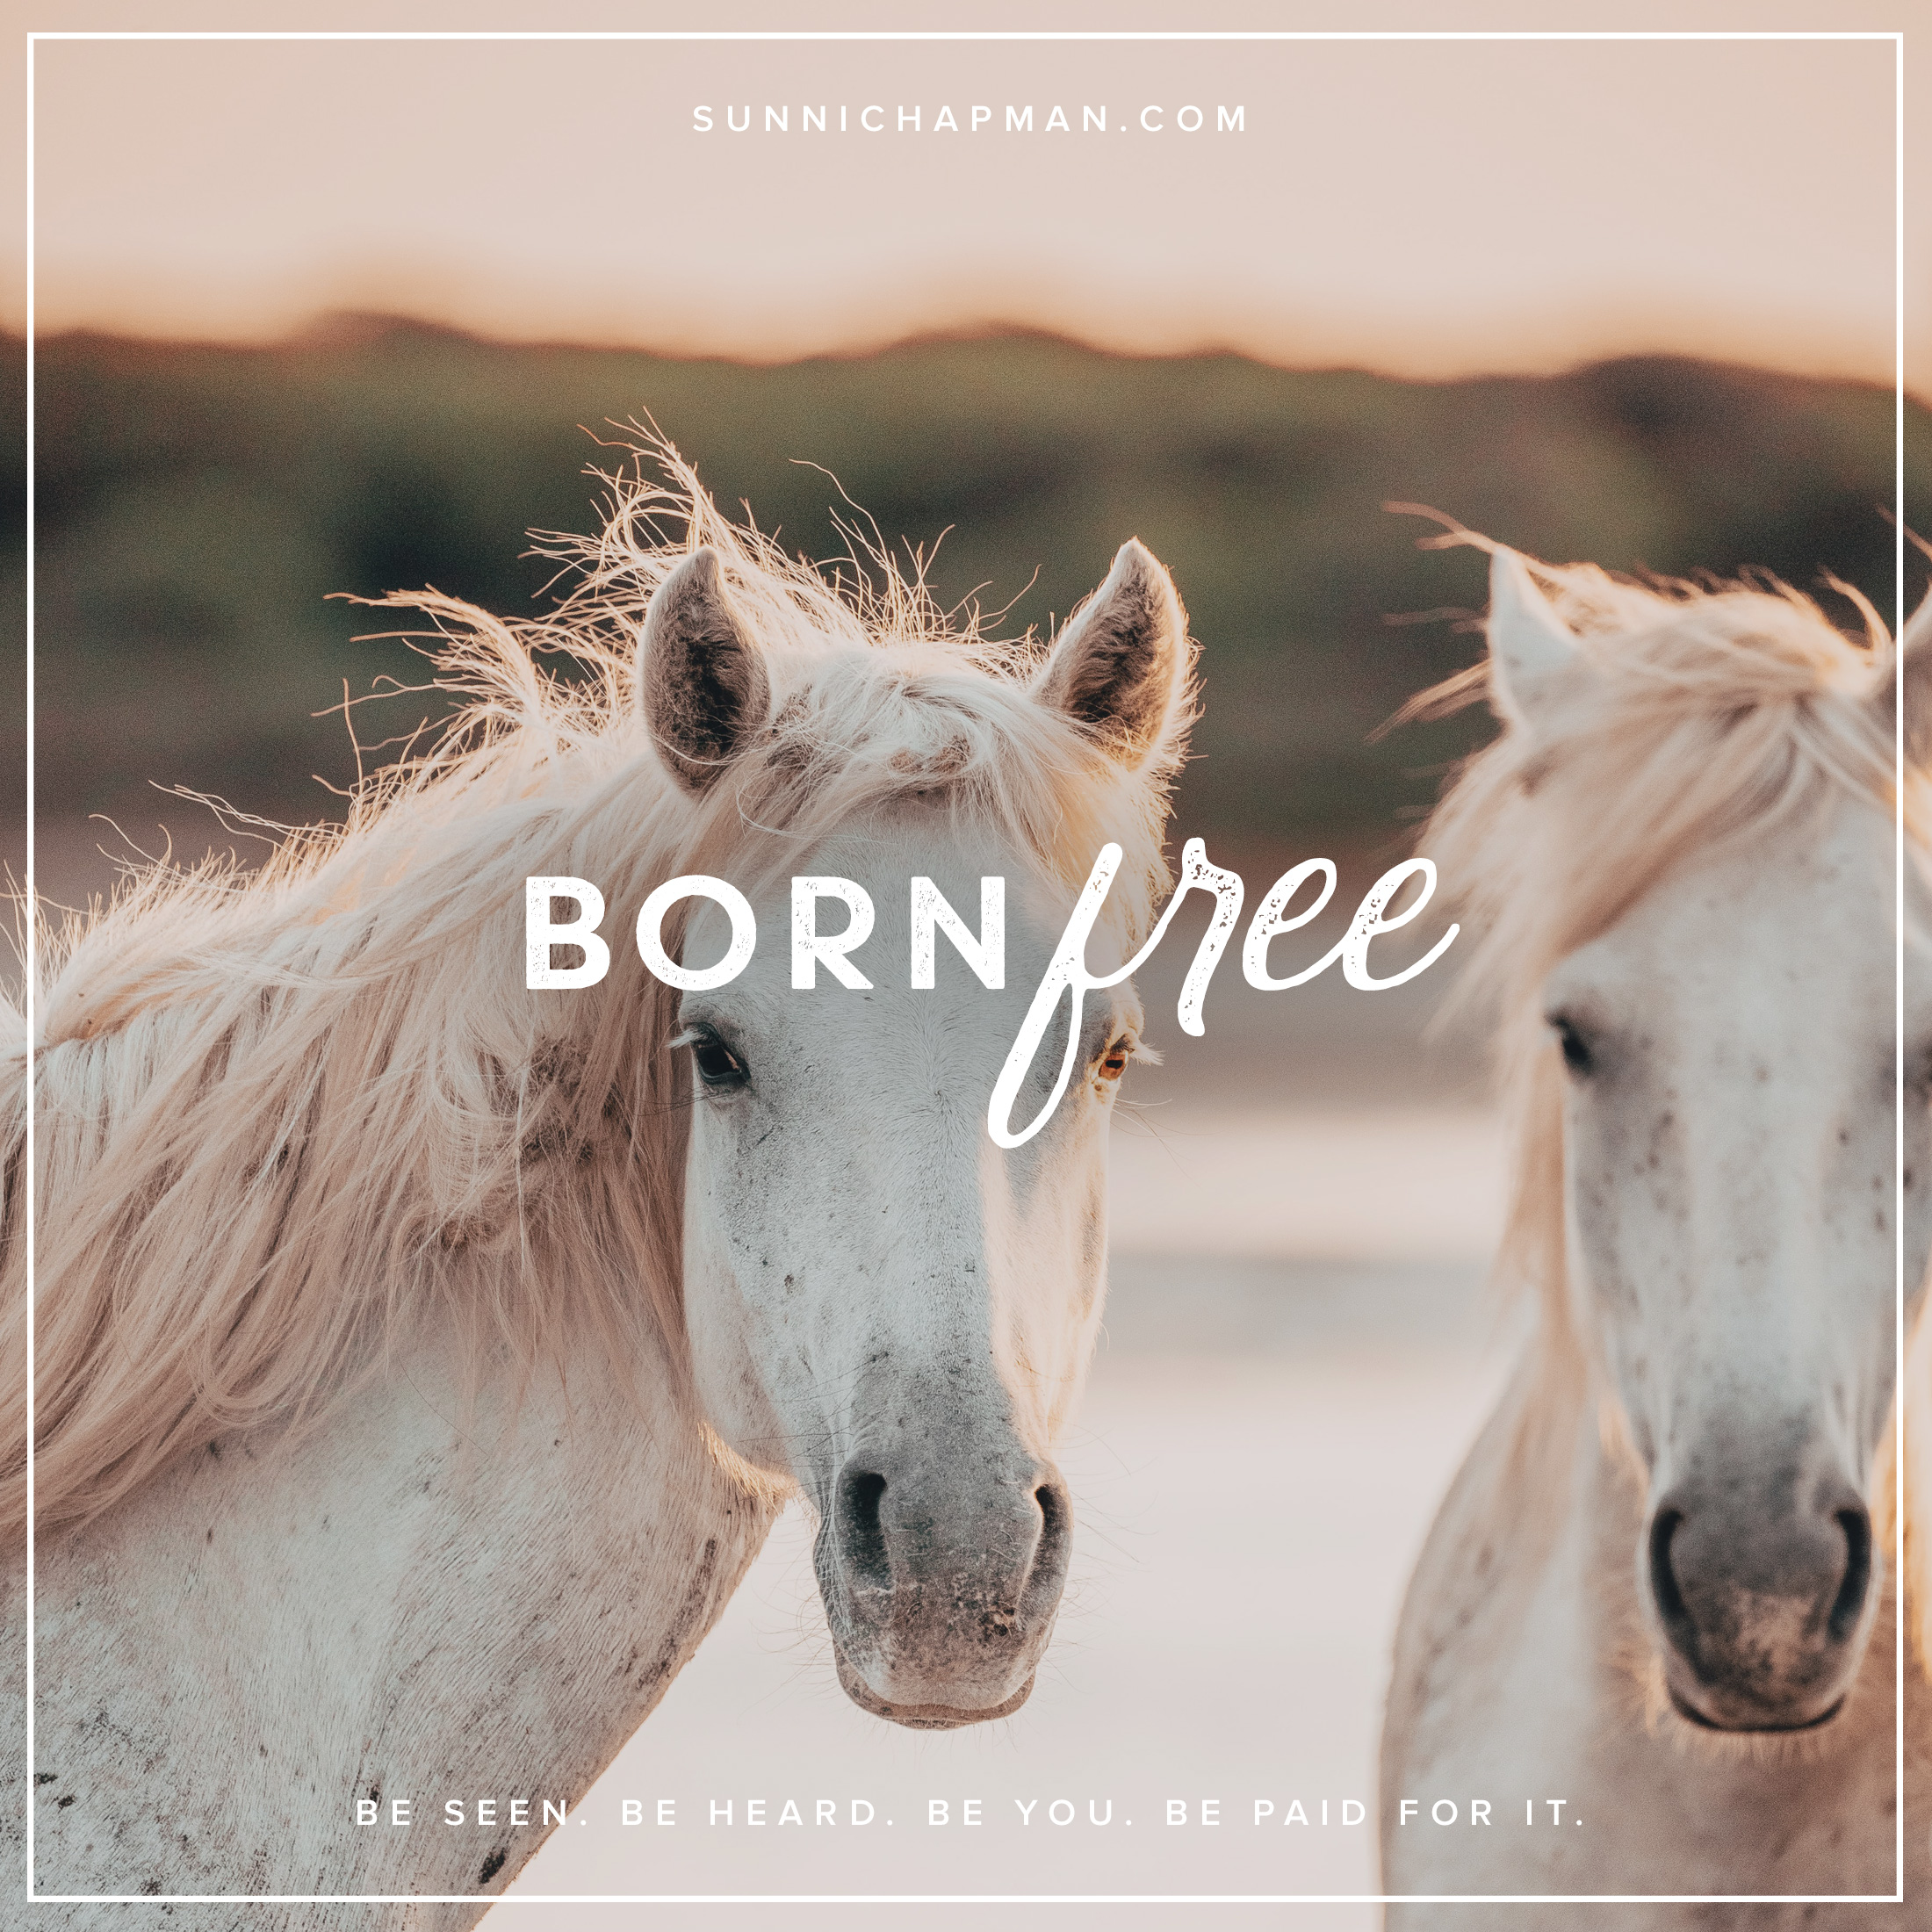 Two beautiful white horses and text: Born Free